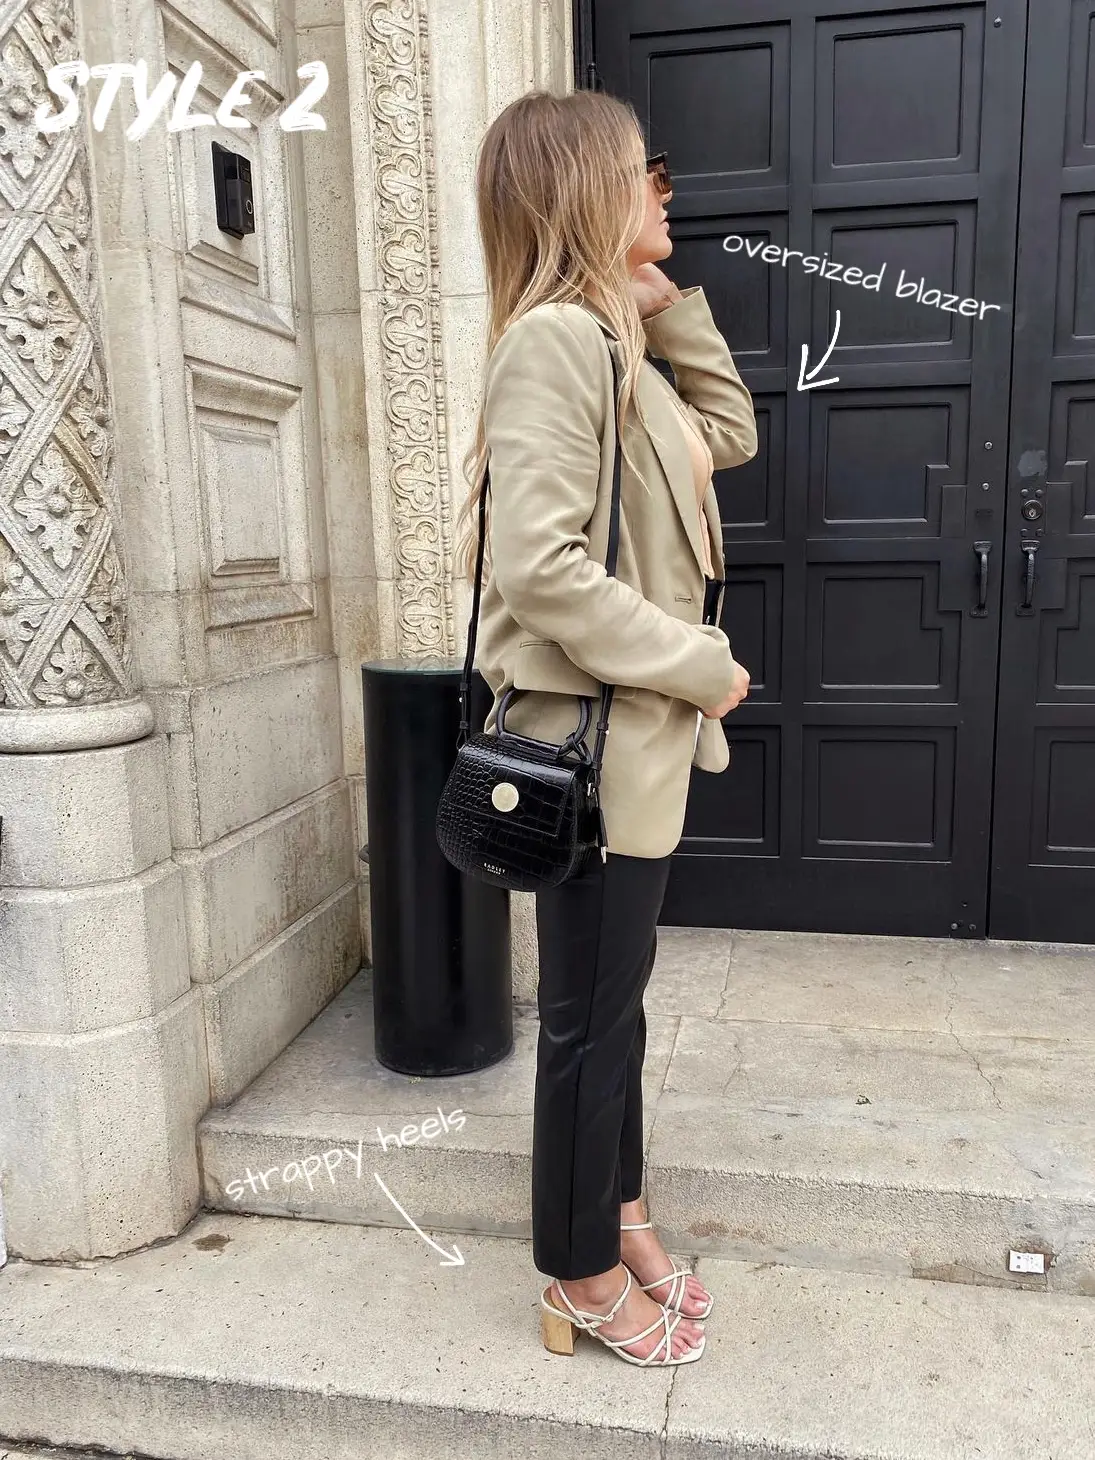 5 Ways To Style Leather Trousers